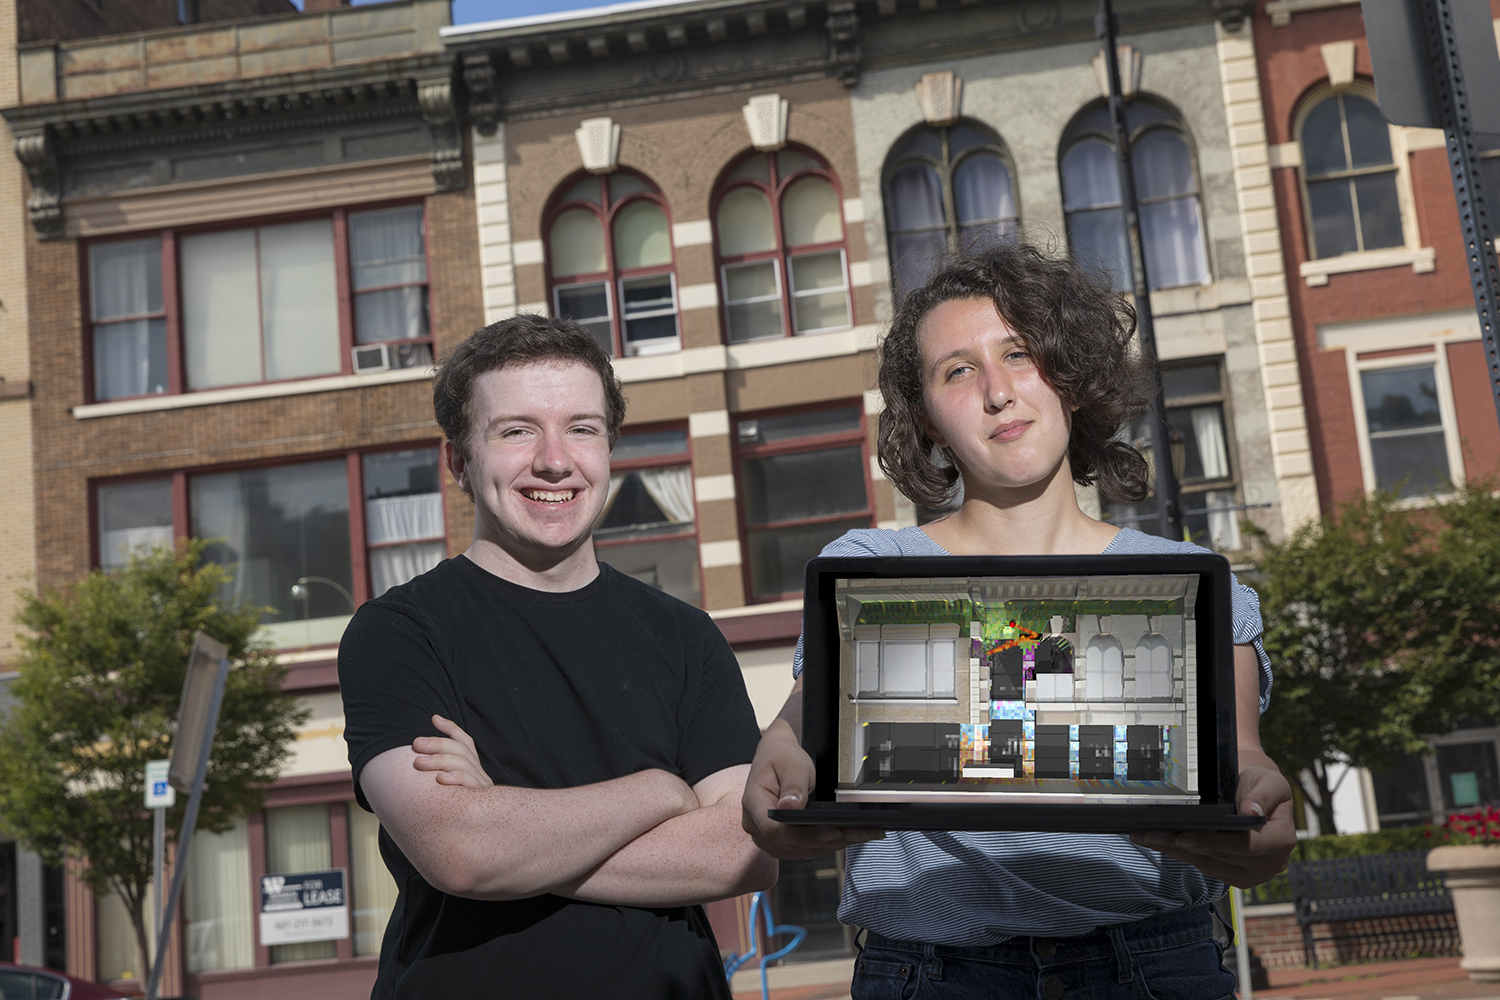 Paul Tilley and Madison Werner, computer science majors at Binghamton University's Thomas J. Watson School of Engineering and Applied Science, have created retro videogames that will be projected on 75-79 Court St. in downtown Binghamton during the LUMA Projection Arts Festival.